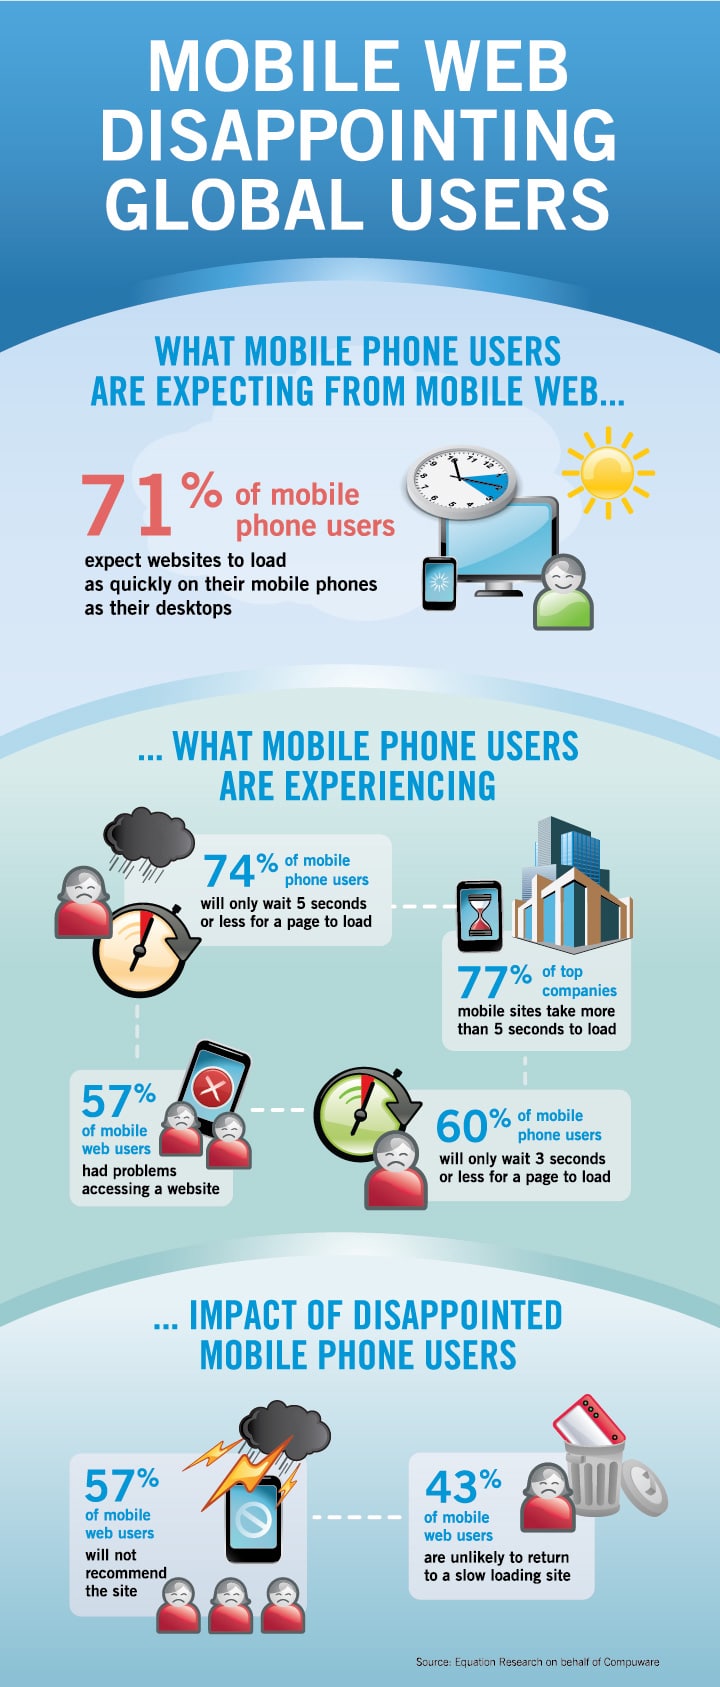 How The Mobile Web Is Disappointing Global Users [Infographic]